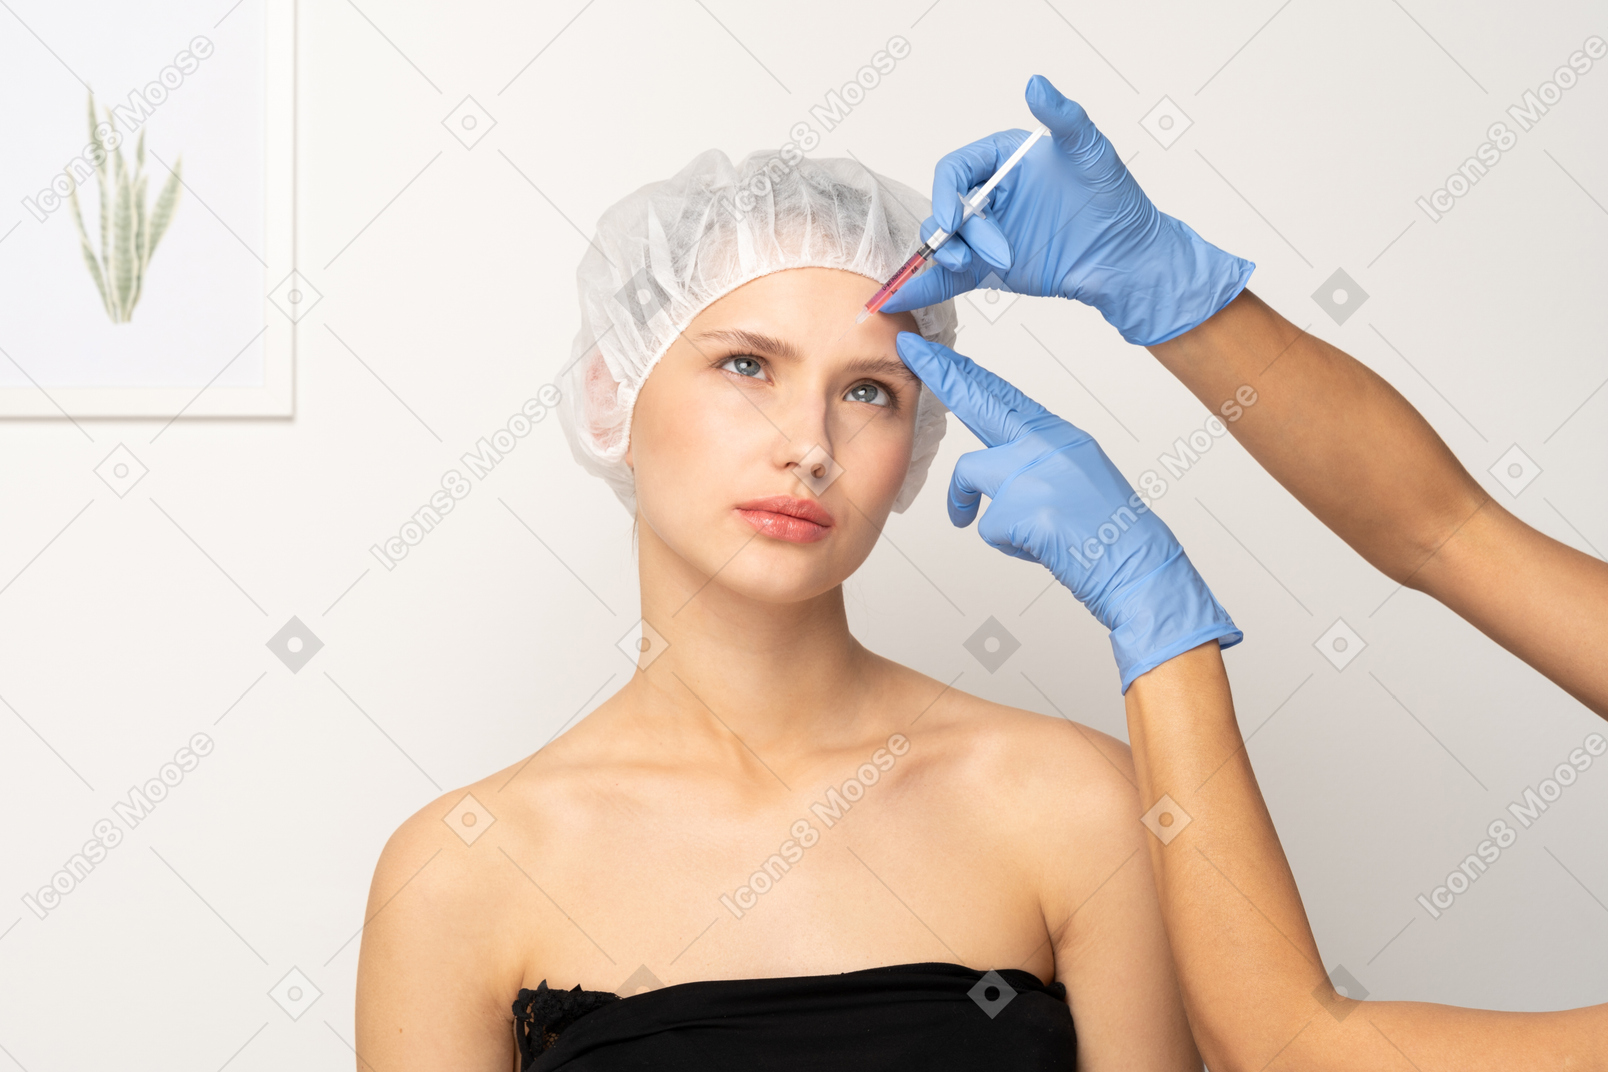 Woman looking uncomfortable during filler injection